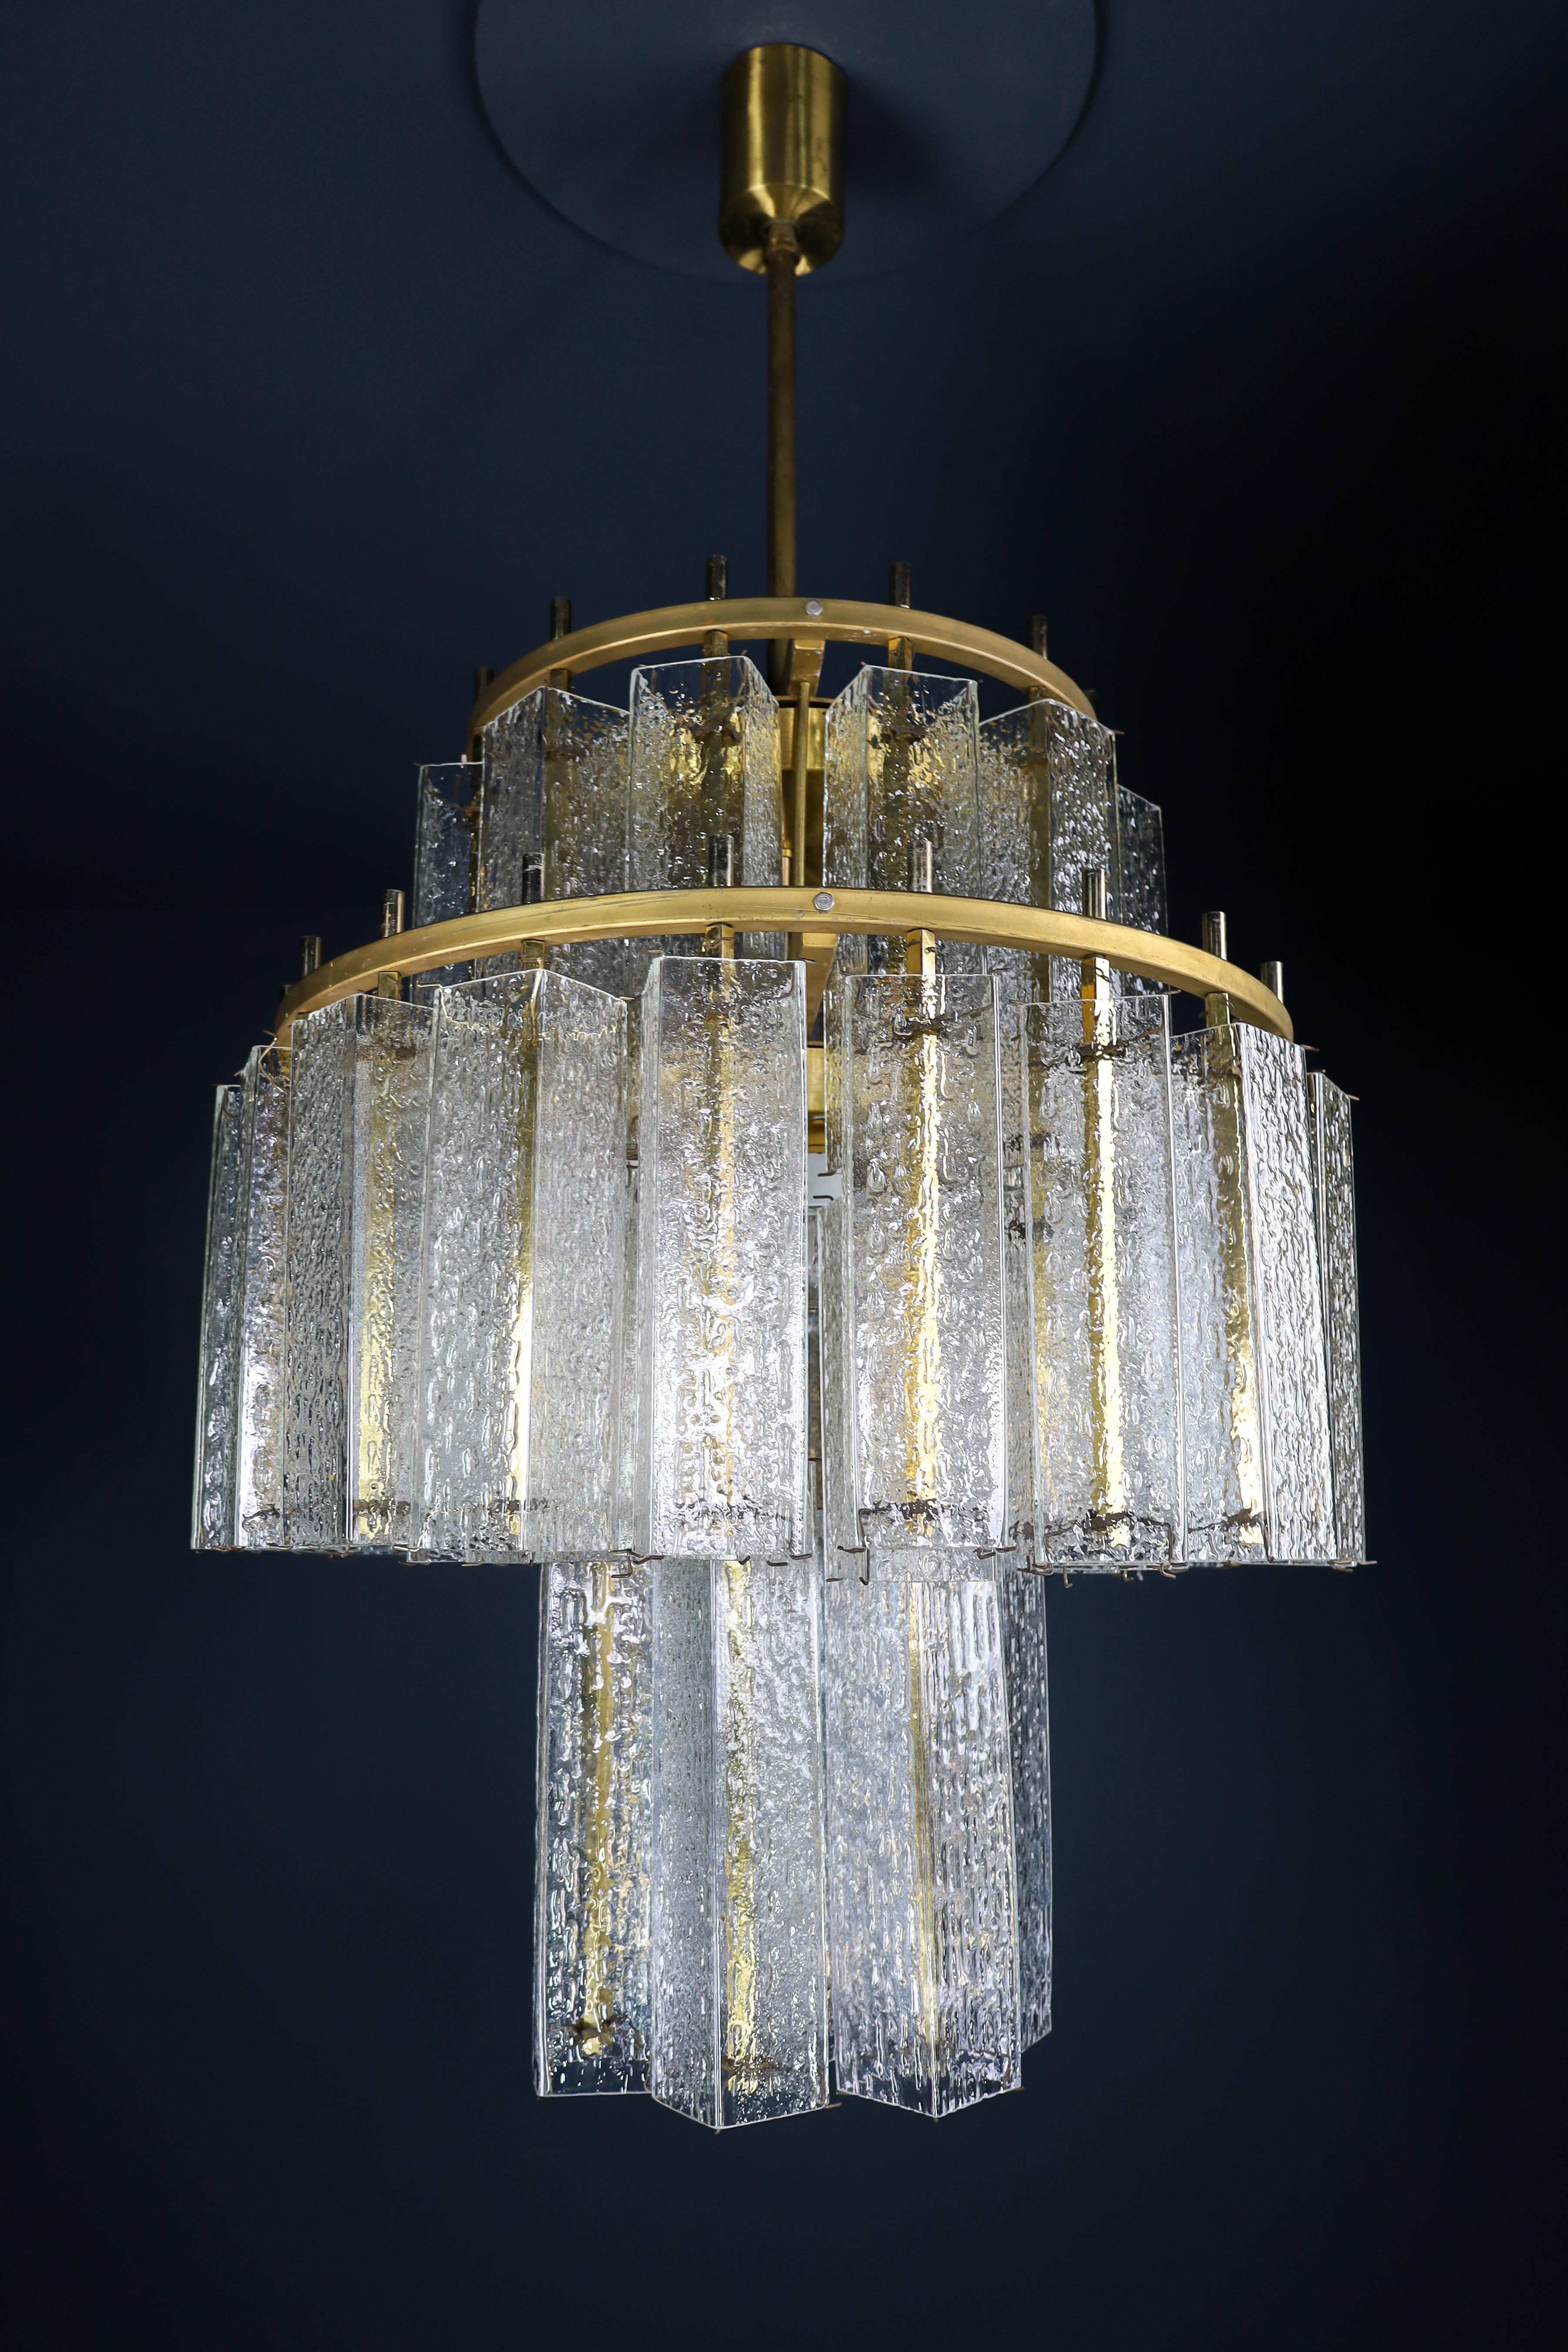 Le Grande XL Midcentury Chandelier In Brass & Structured Ice Glass, Austria 1950 In Good Condition For Sale In Almelo, NL